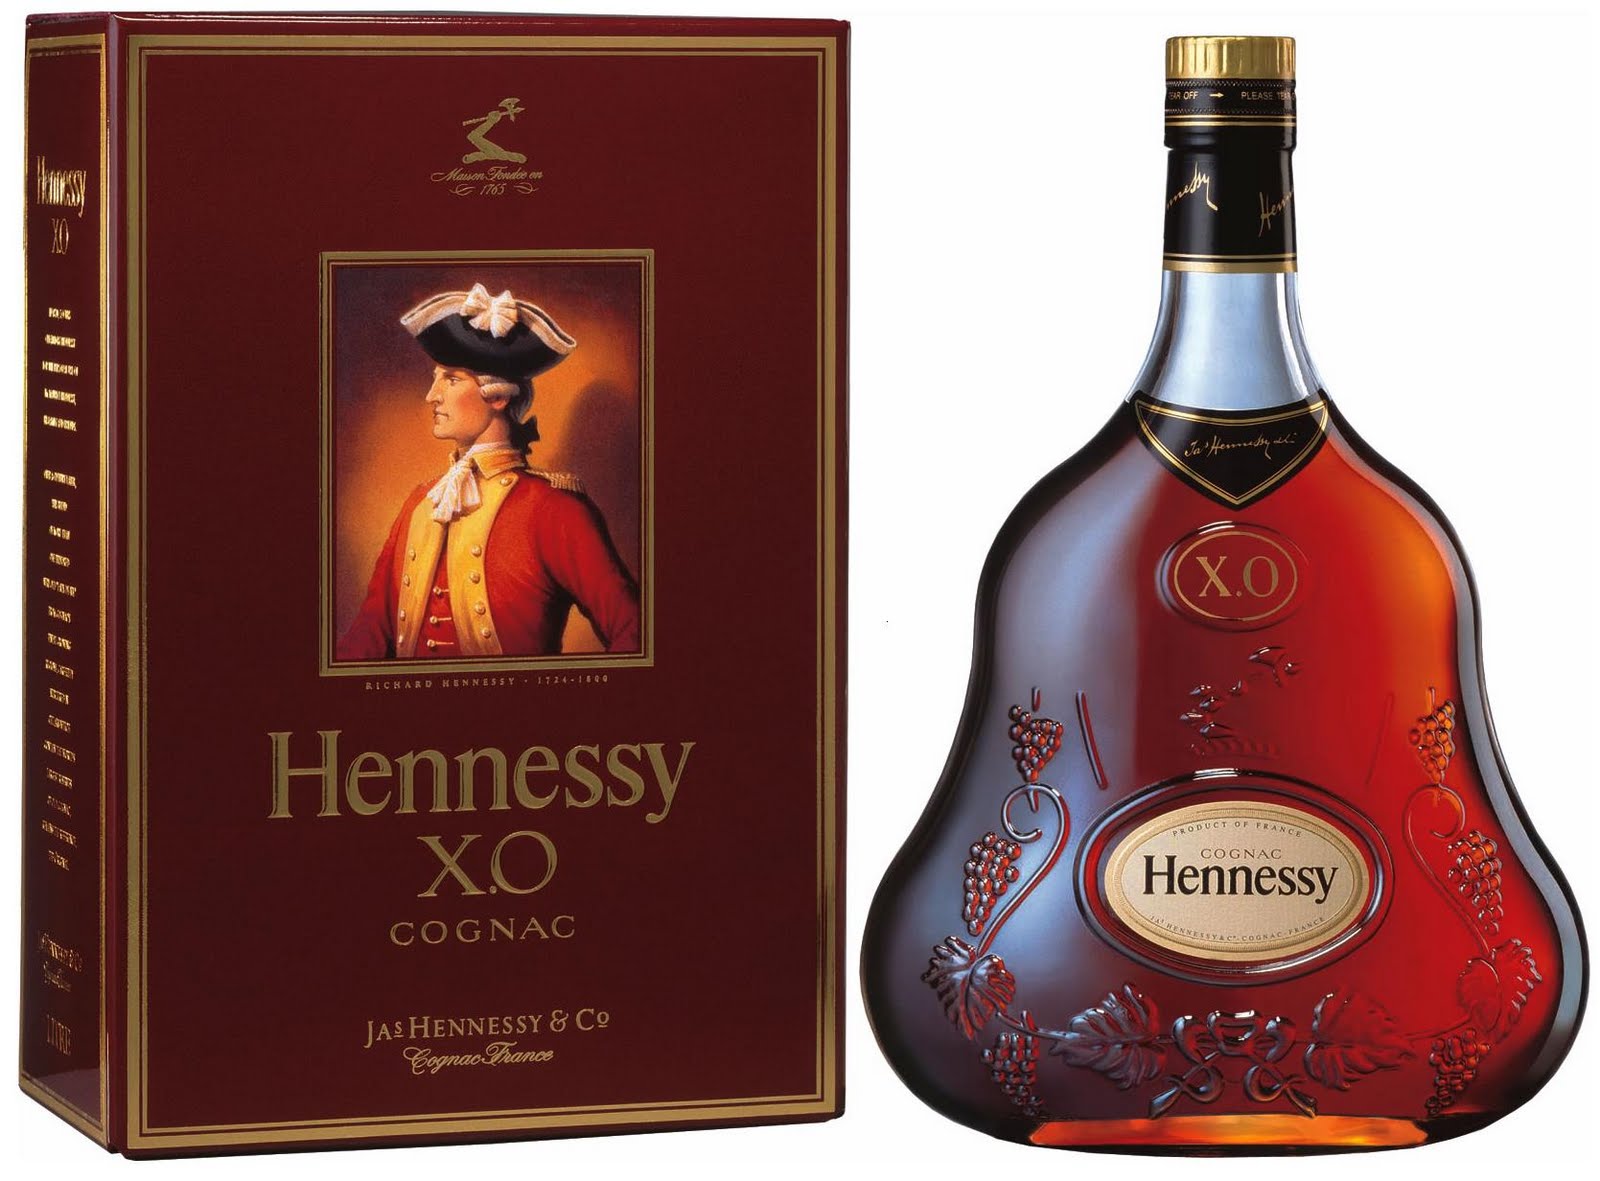 Products Hennessy HD Wallpaper | Background Image